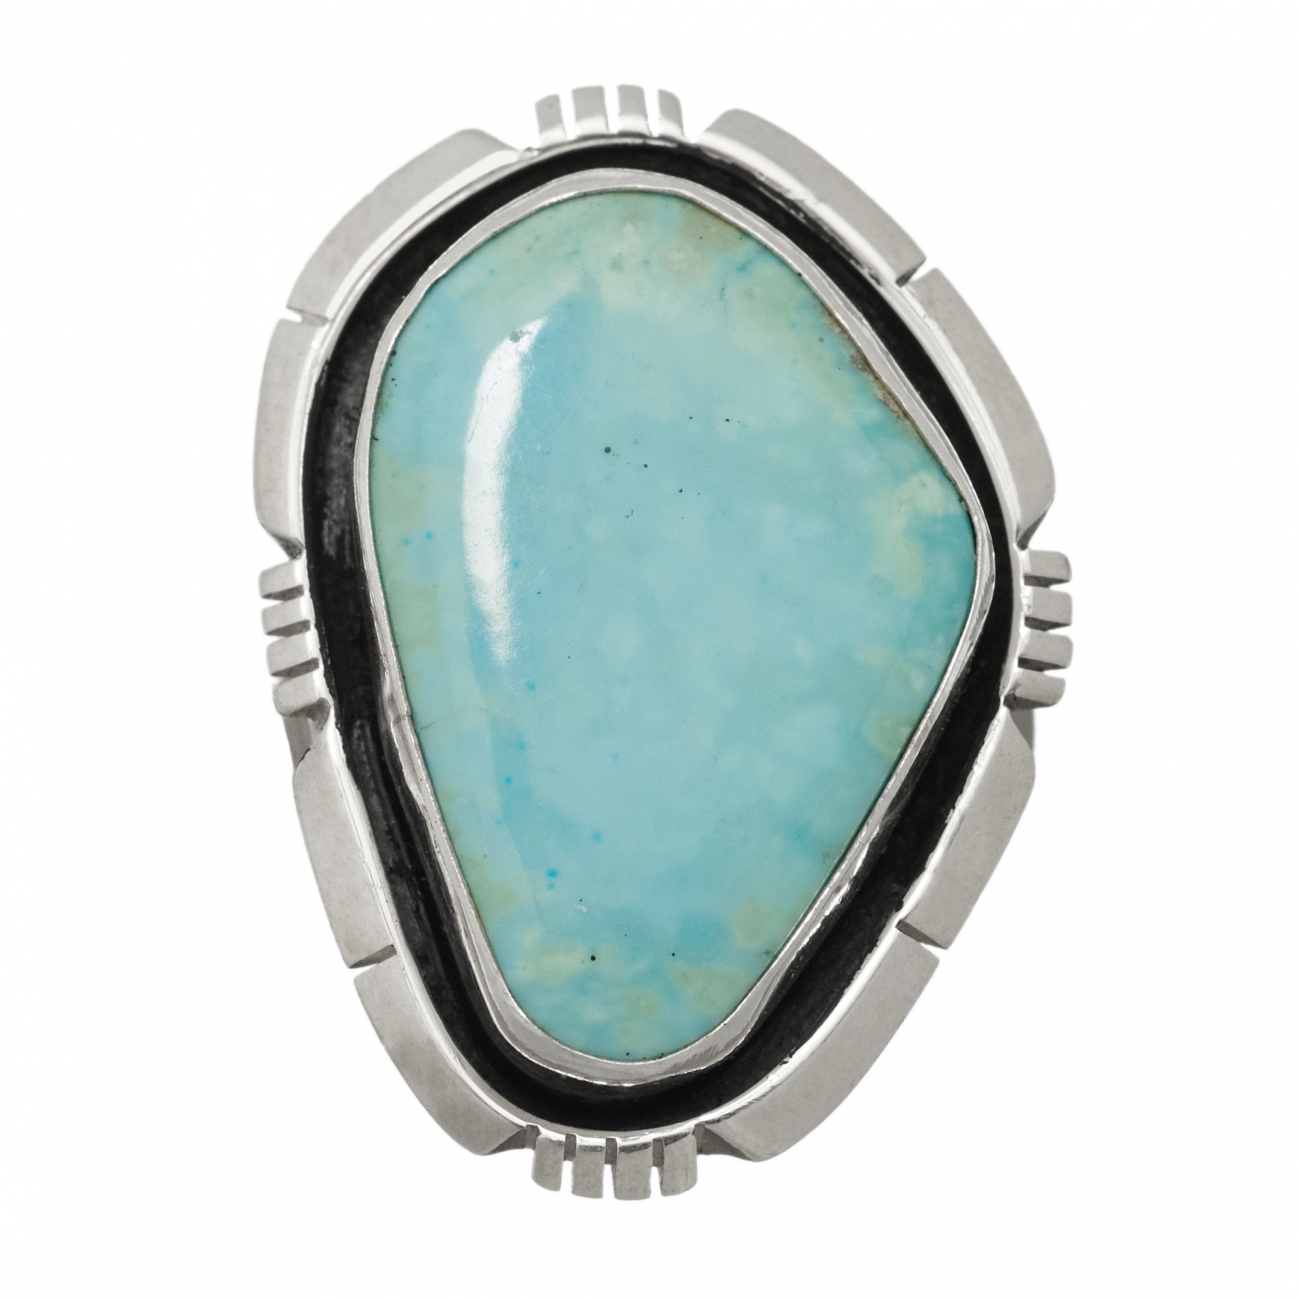 Navajo ring for men BA1076 in turquoise and silver - Harpo Paris